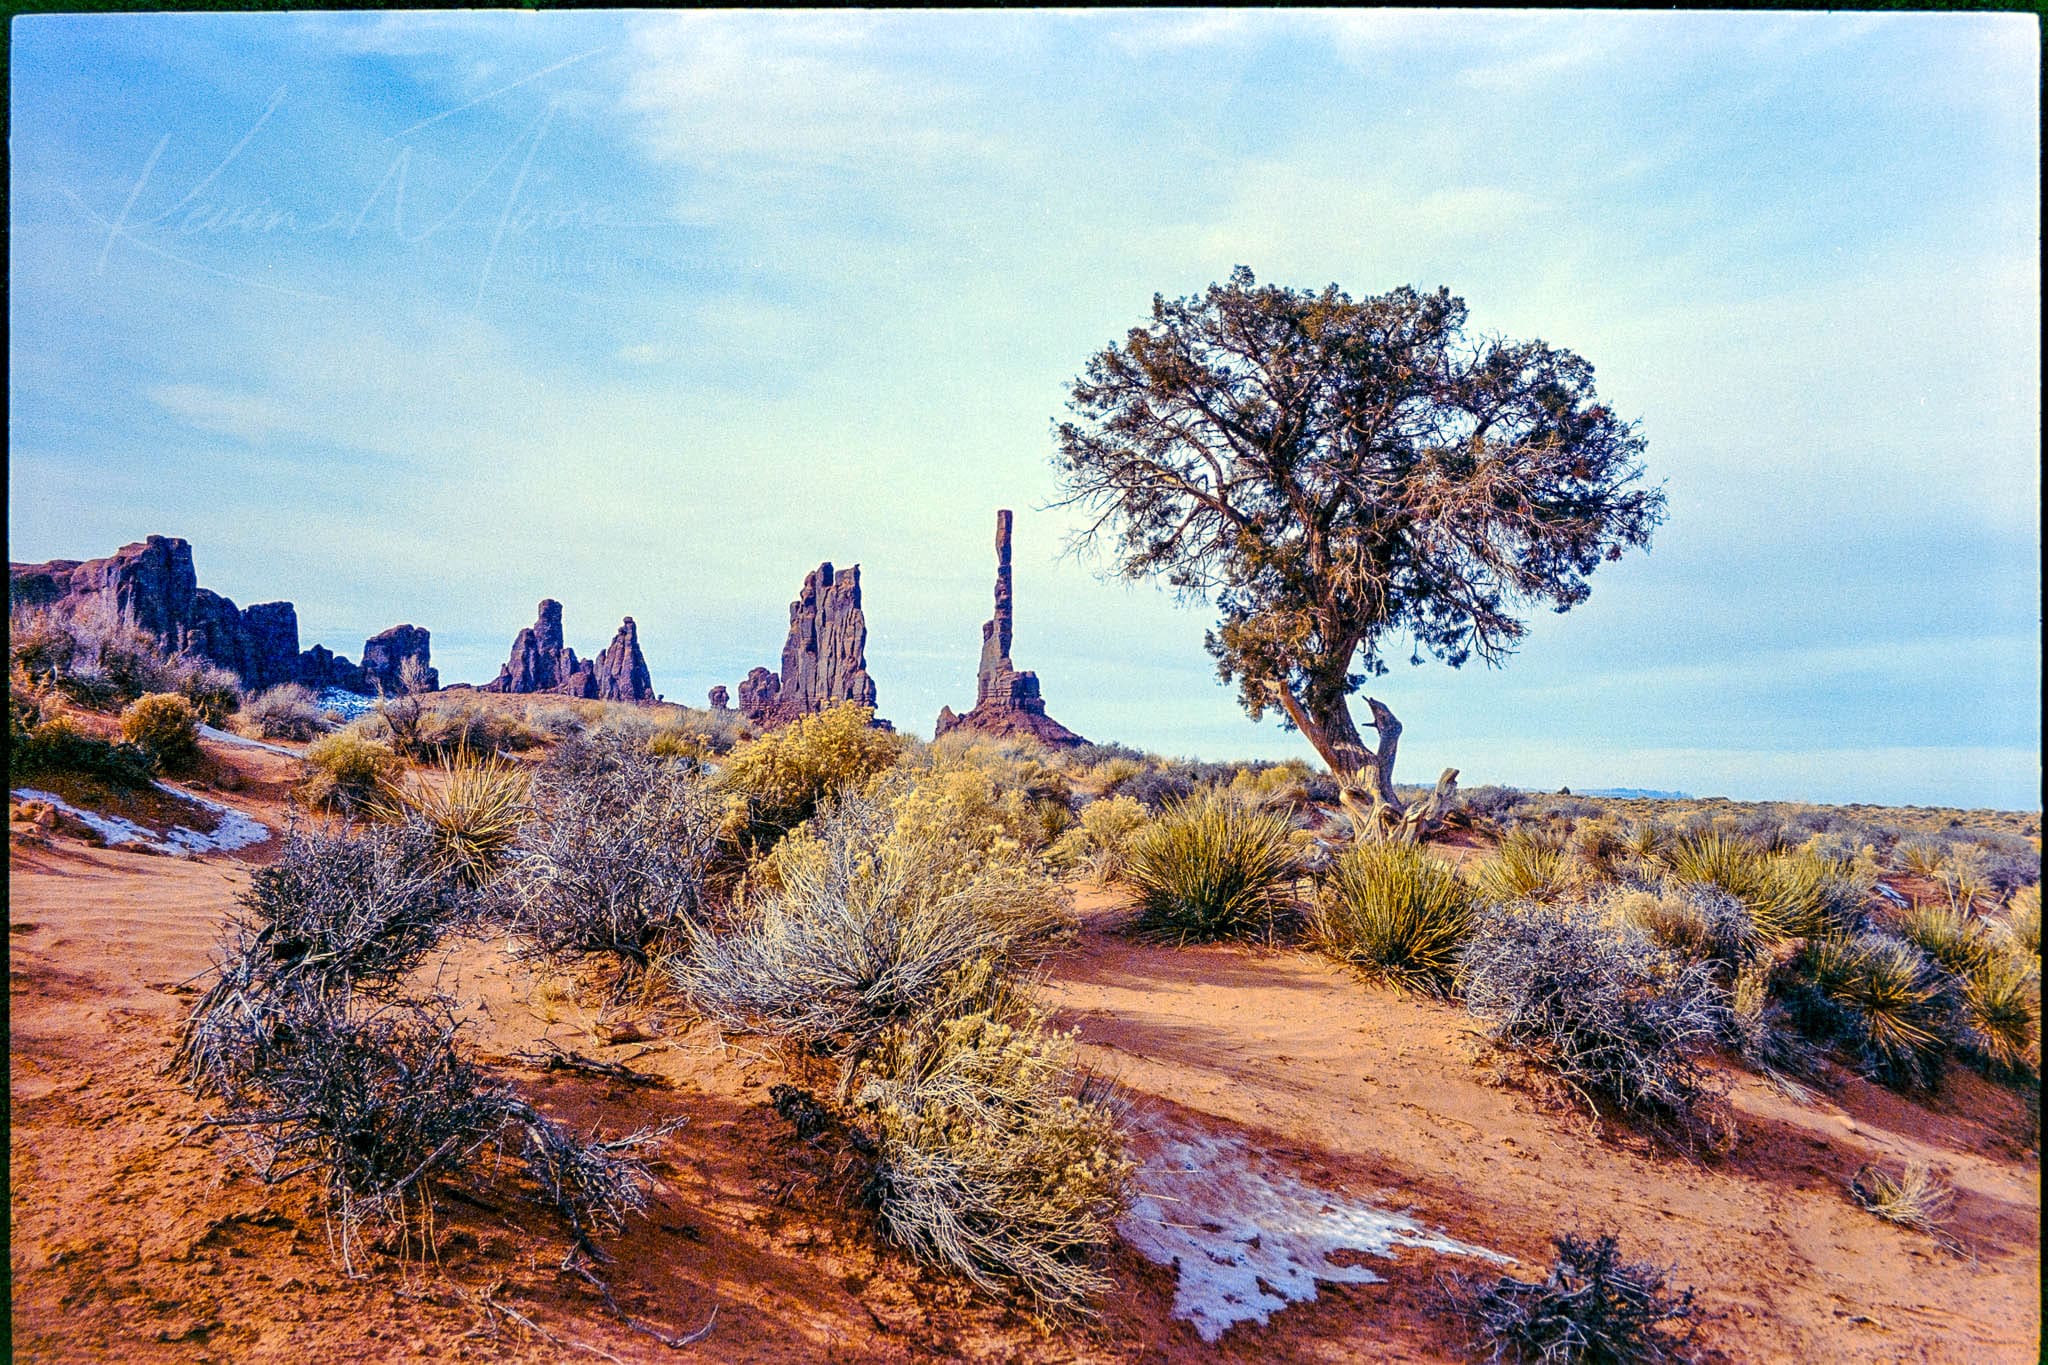 Desert landscape with towering butte and resilient vegetation in Monument Valley, Arizona.